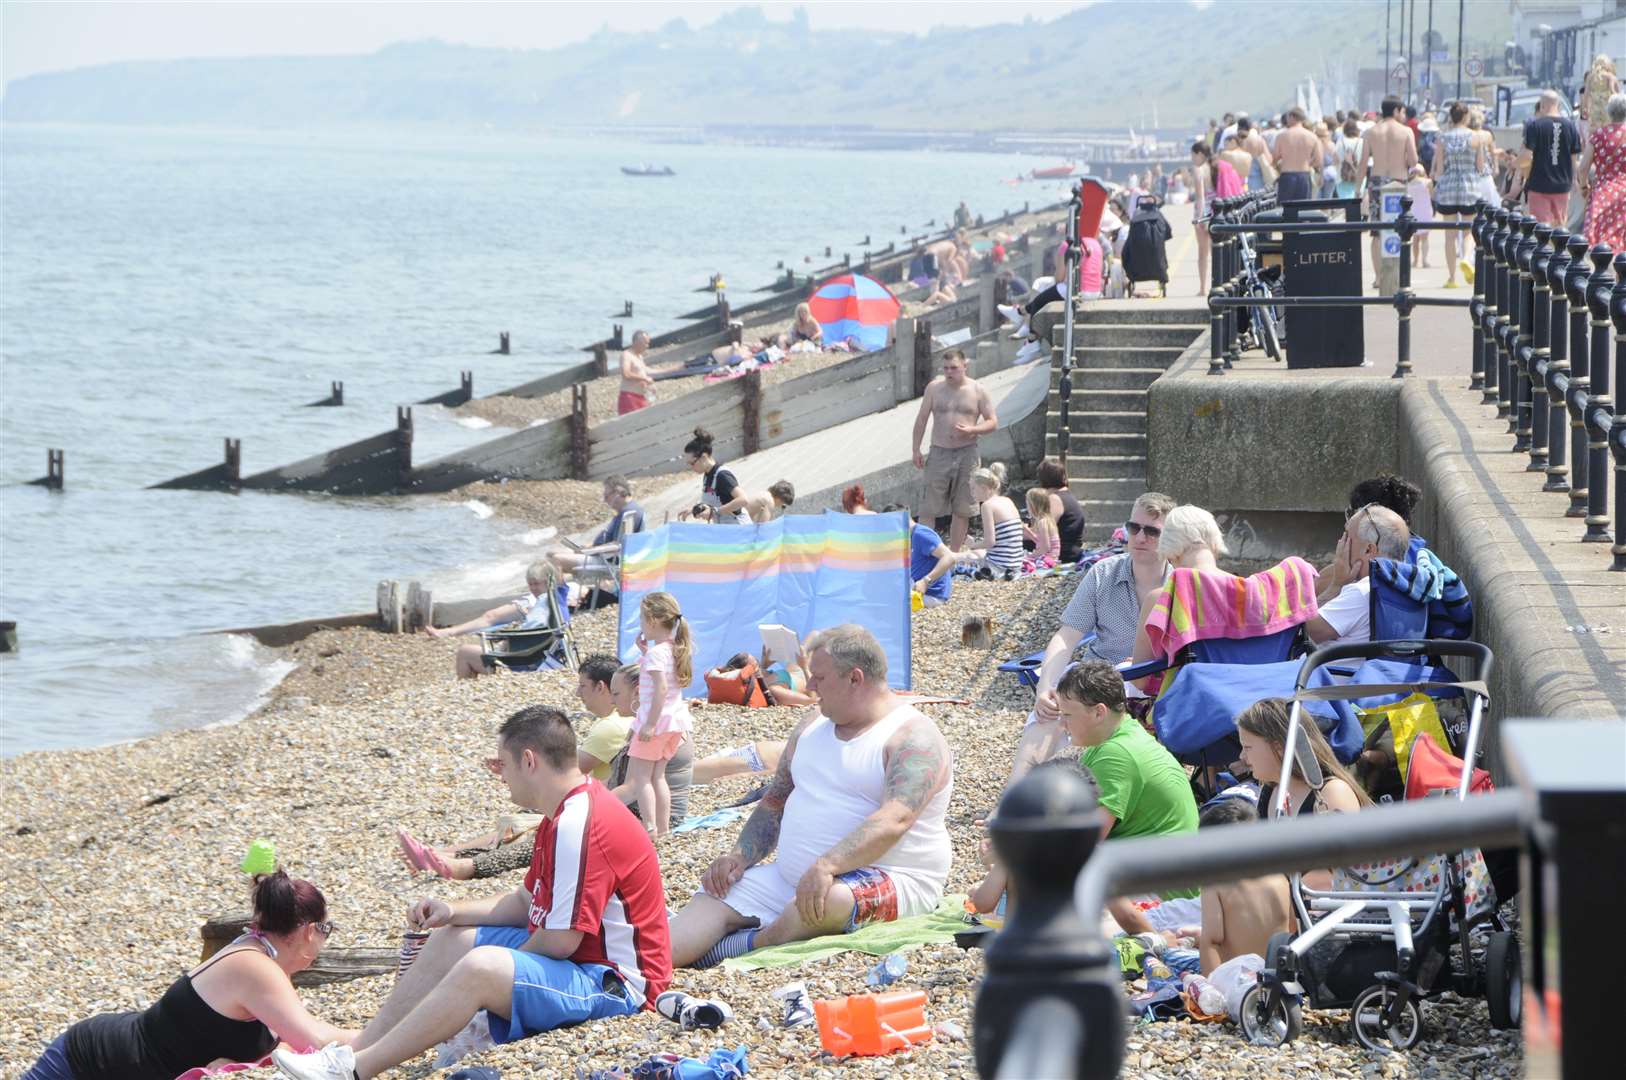 Crowds flock to the beach at Herne Bay